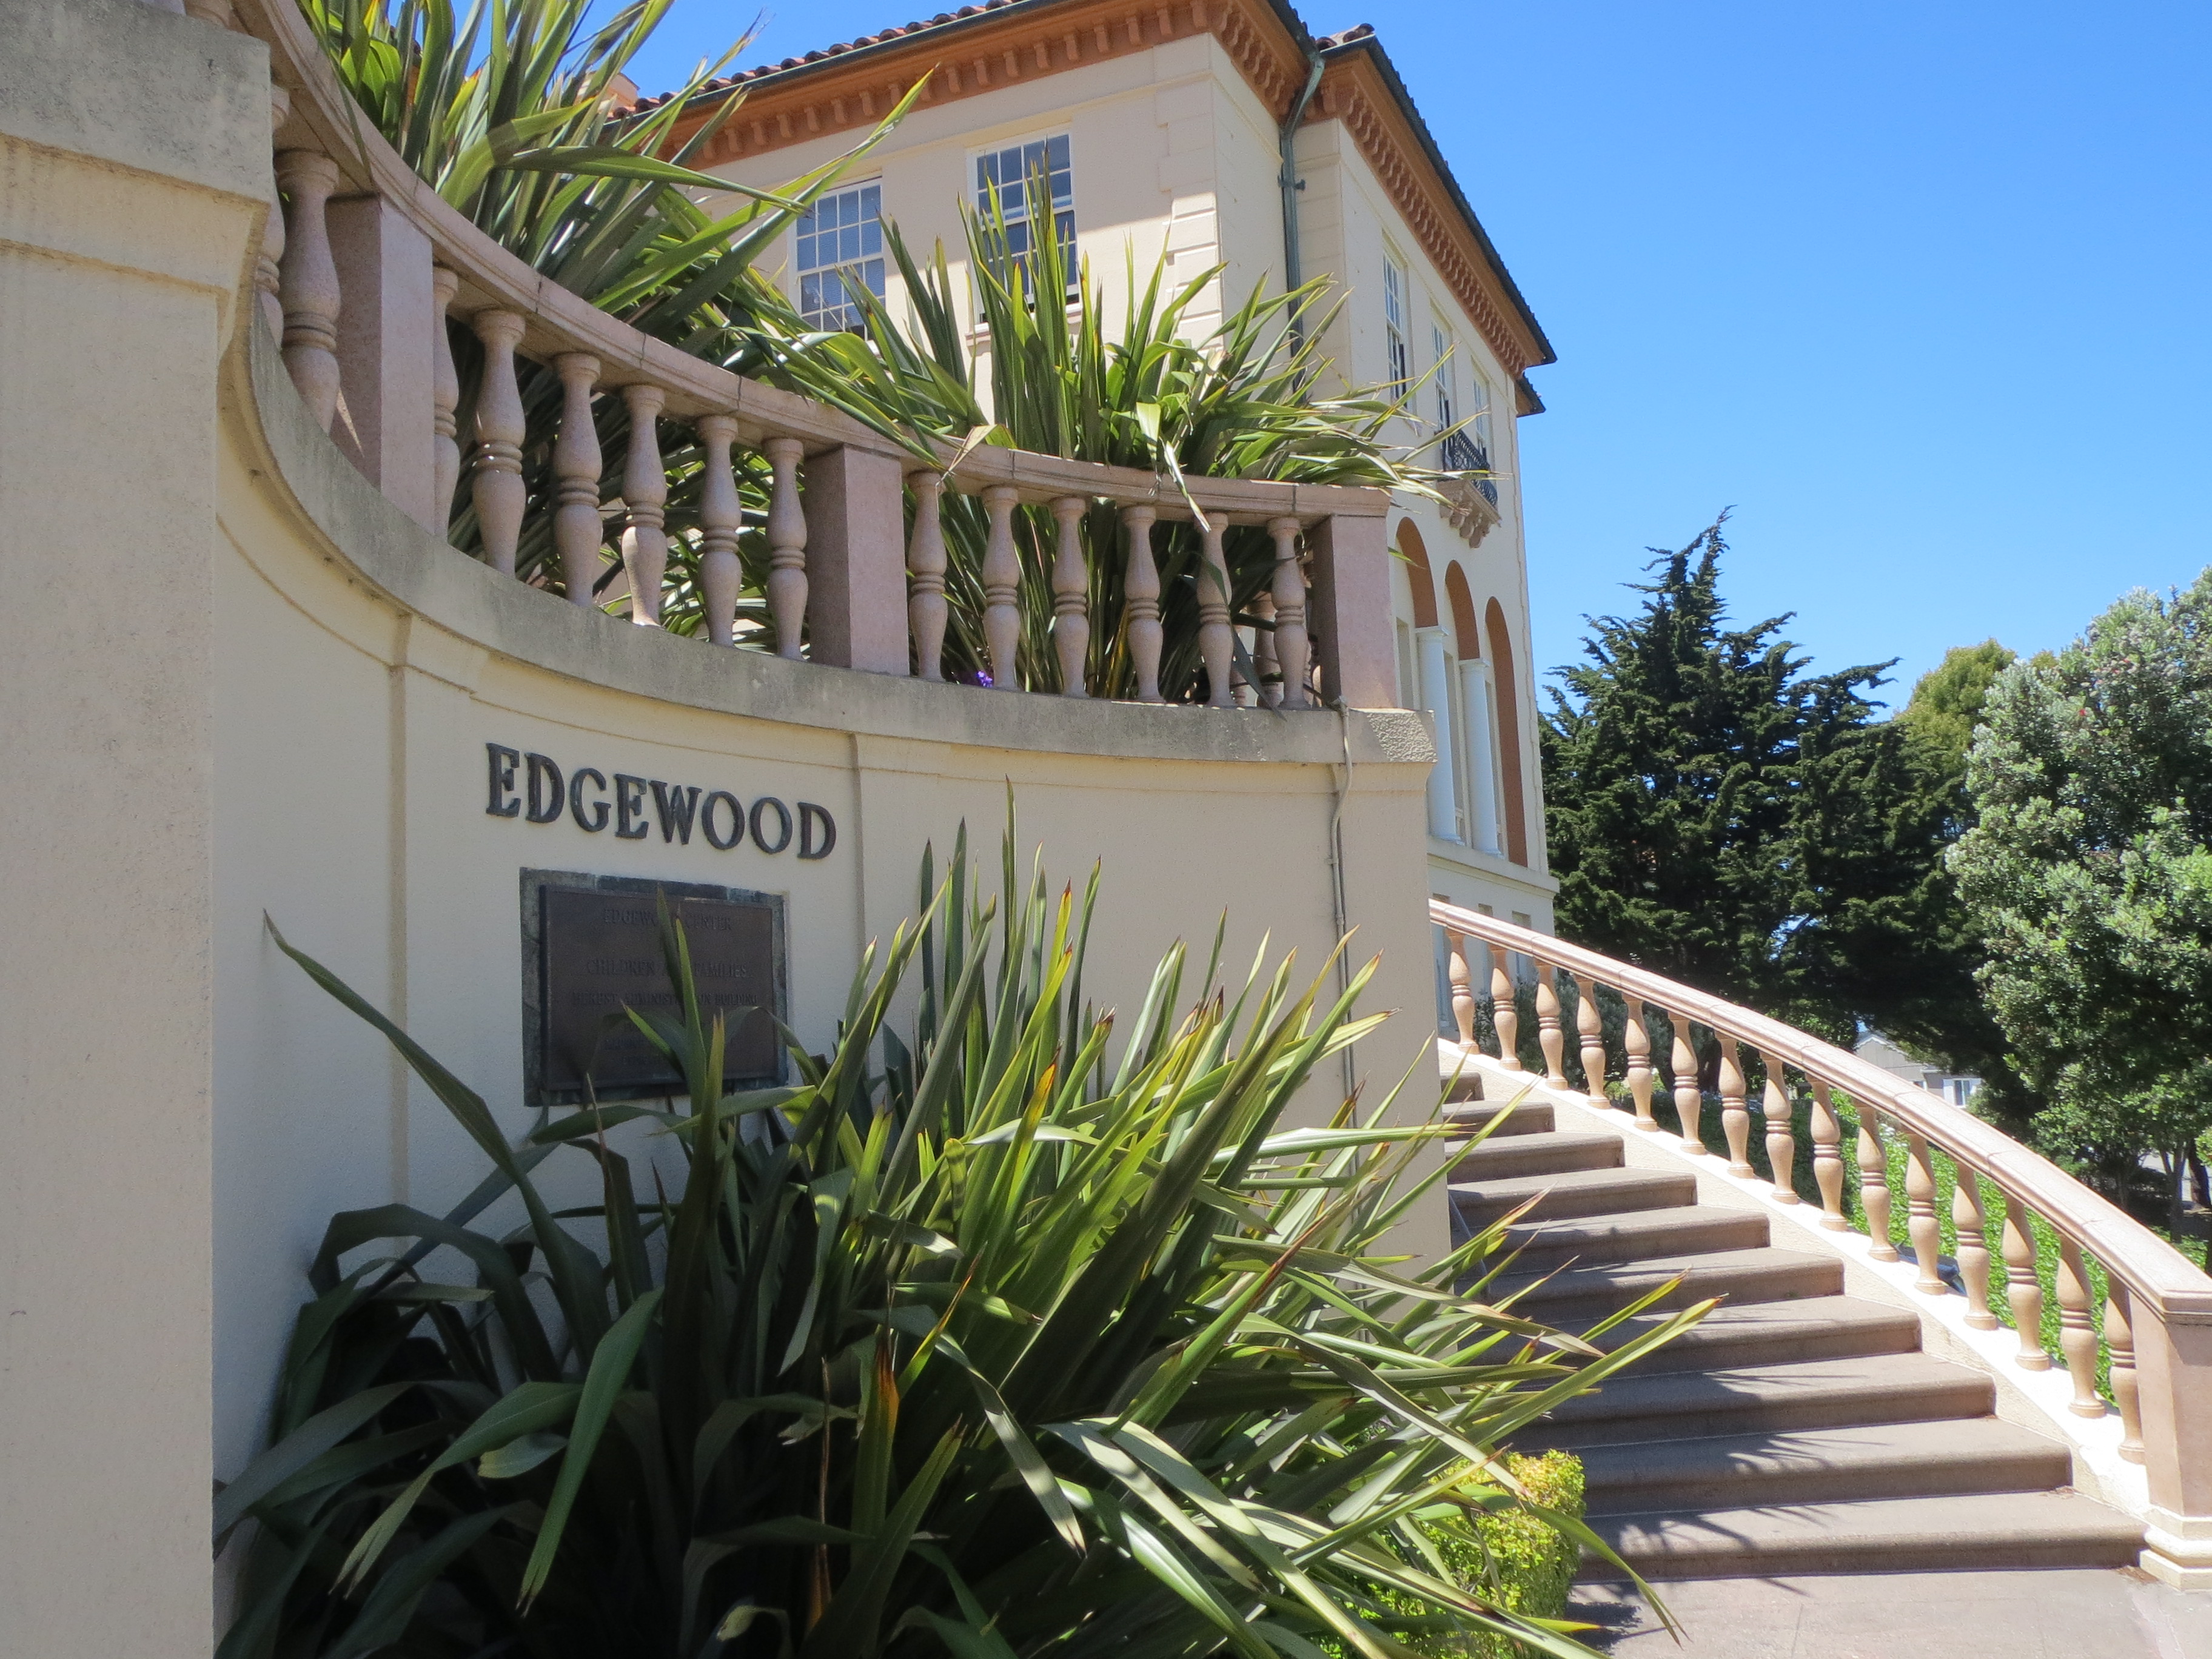 Edgewood Center for Children and Families